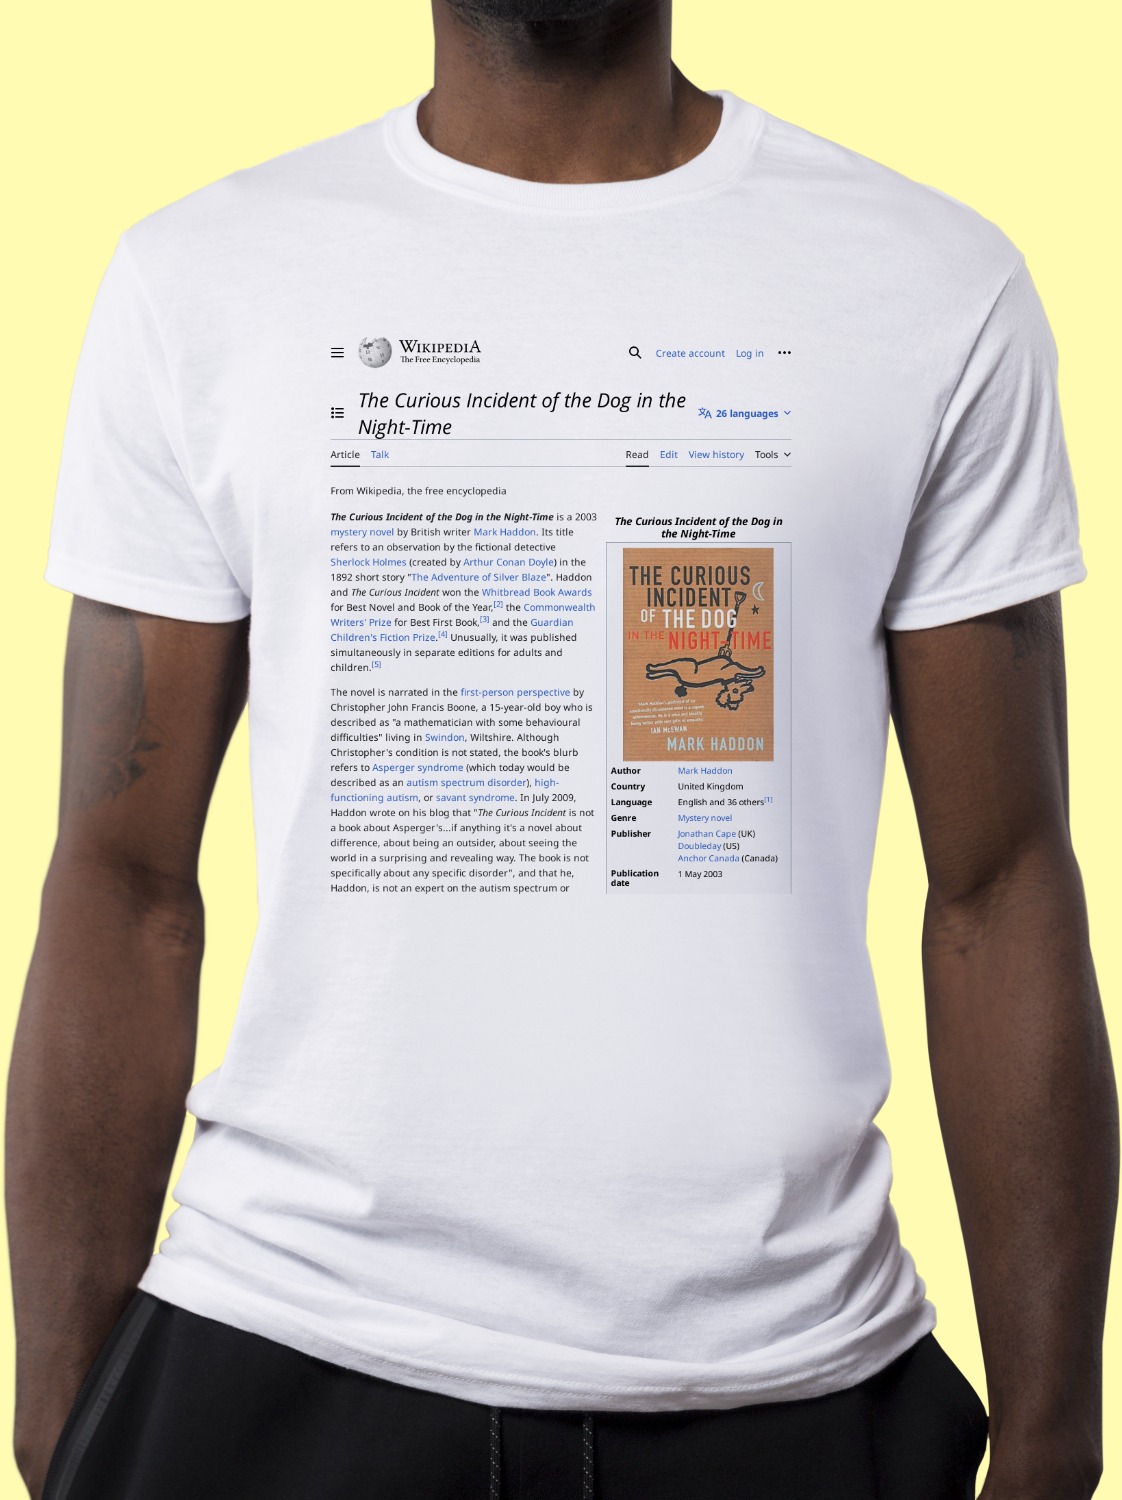 The_Curious_Incident_of_the_Dog_in_the_Night-Time Wikipedia Shirt